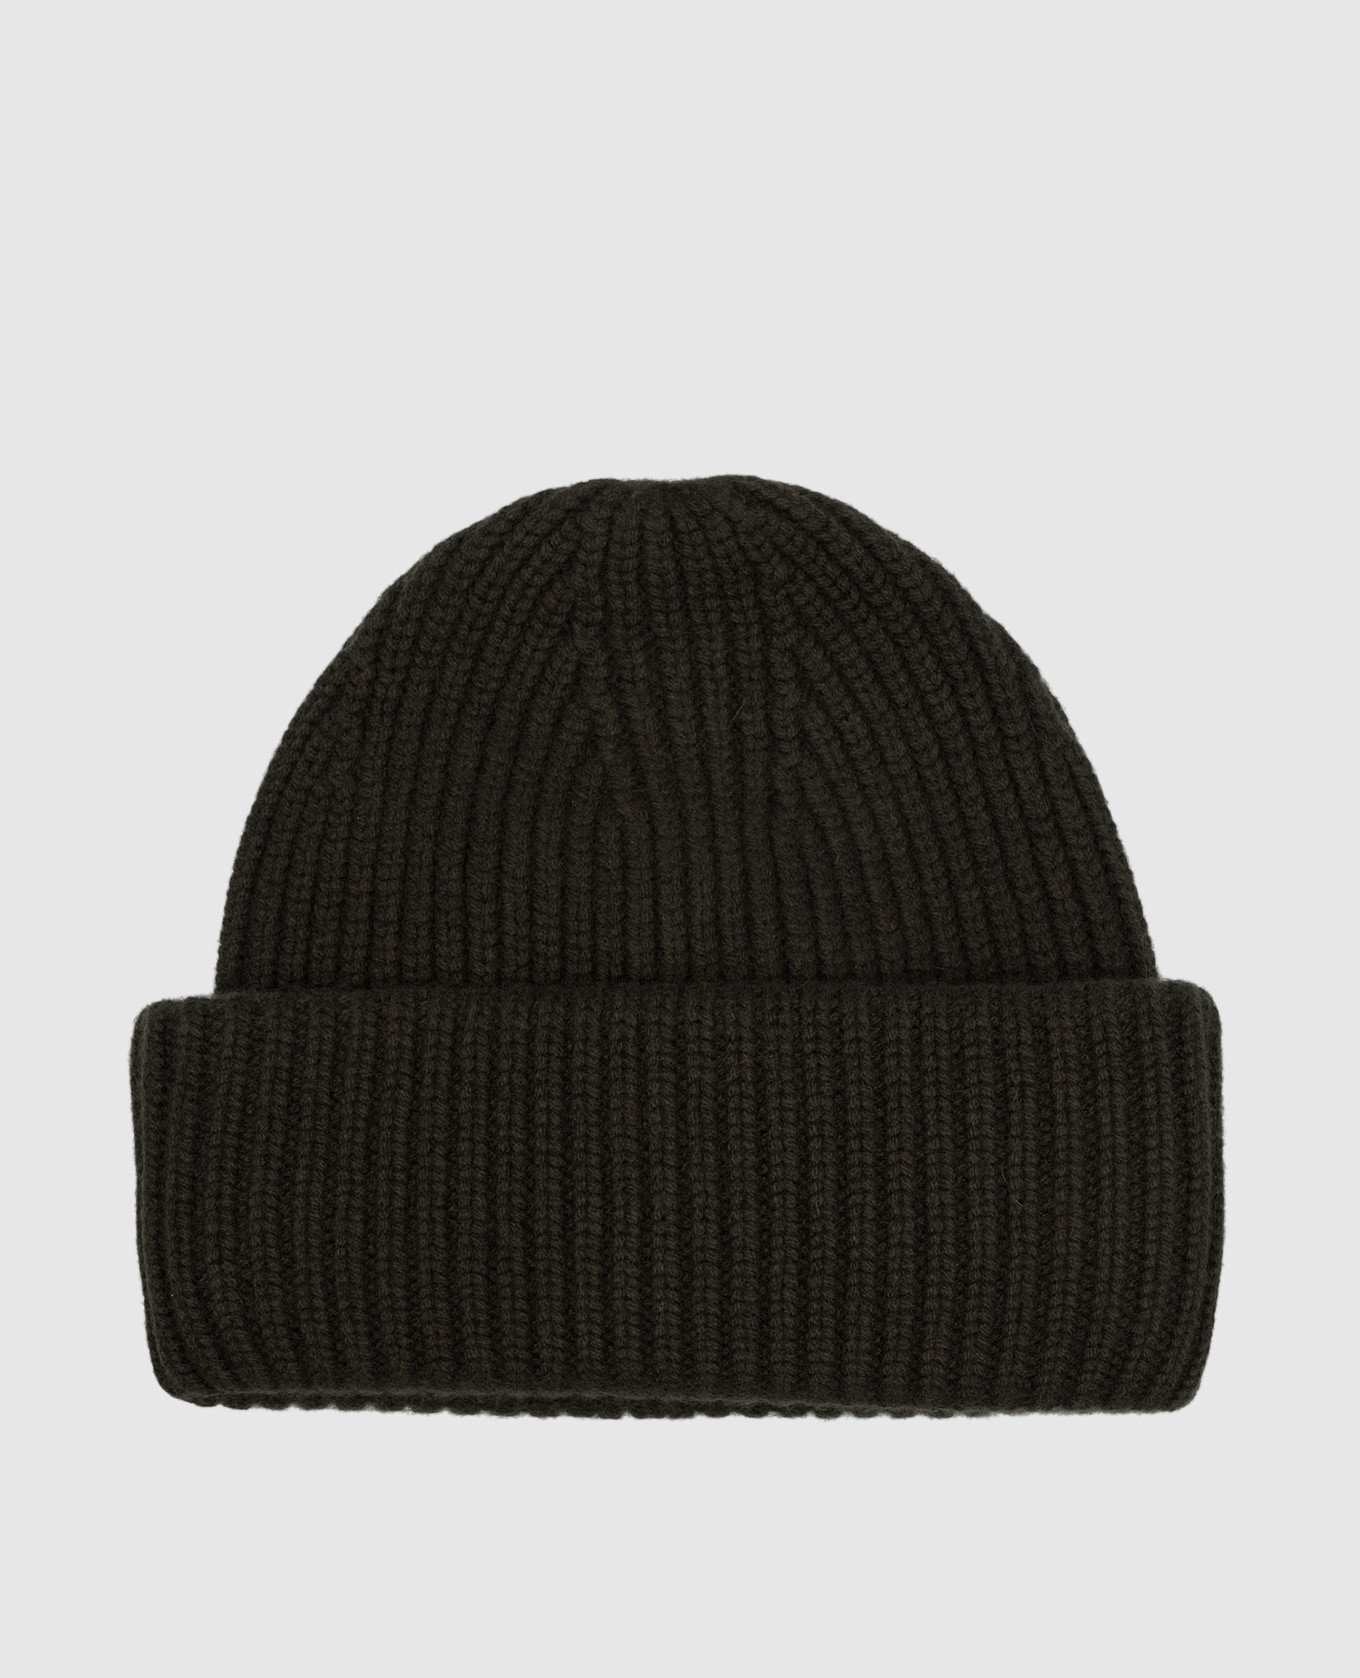 Brown cap made of wool and cashmere